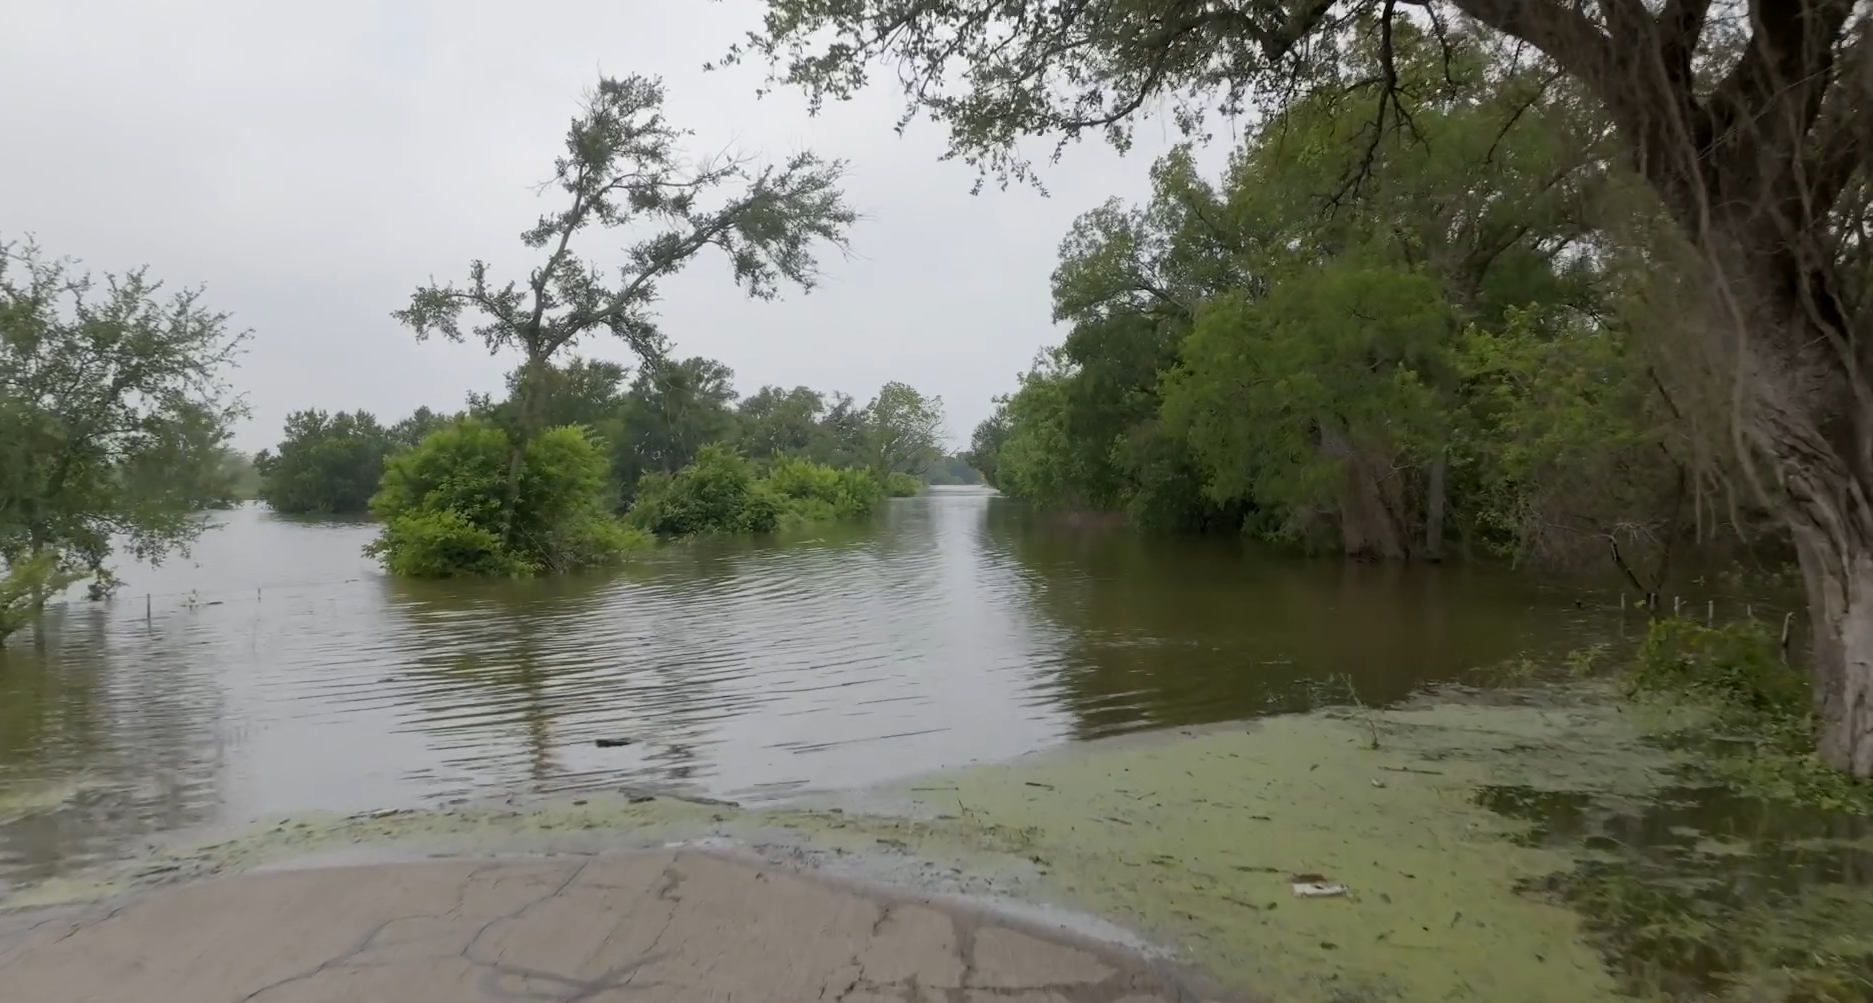 texas lake overfull after heavy rainfall, forcing dam release